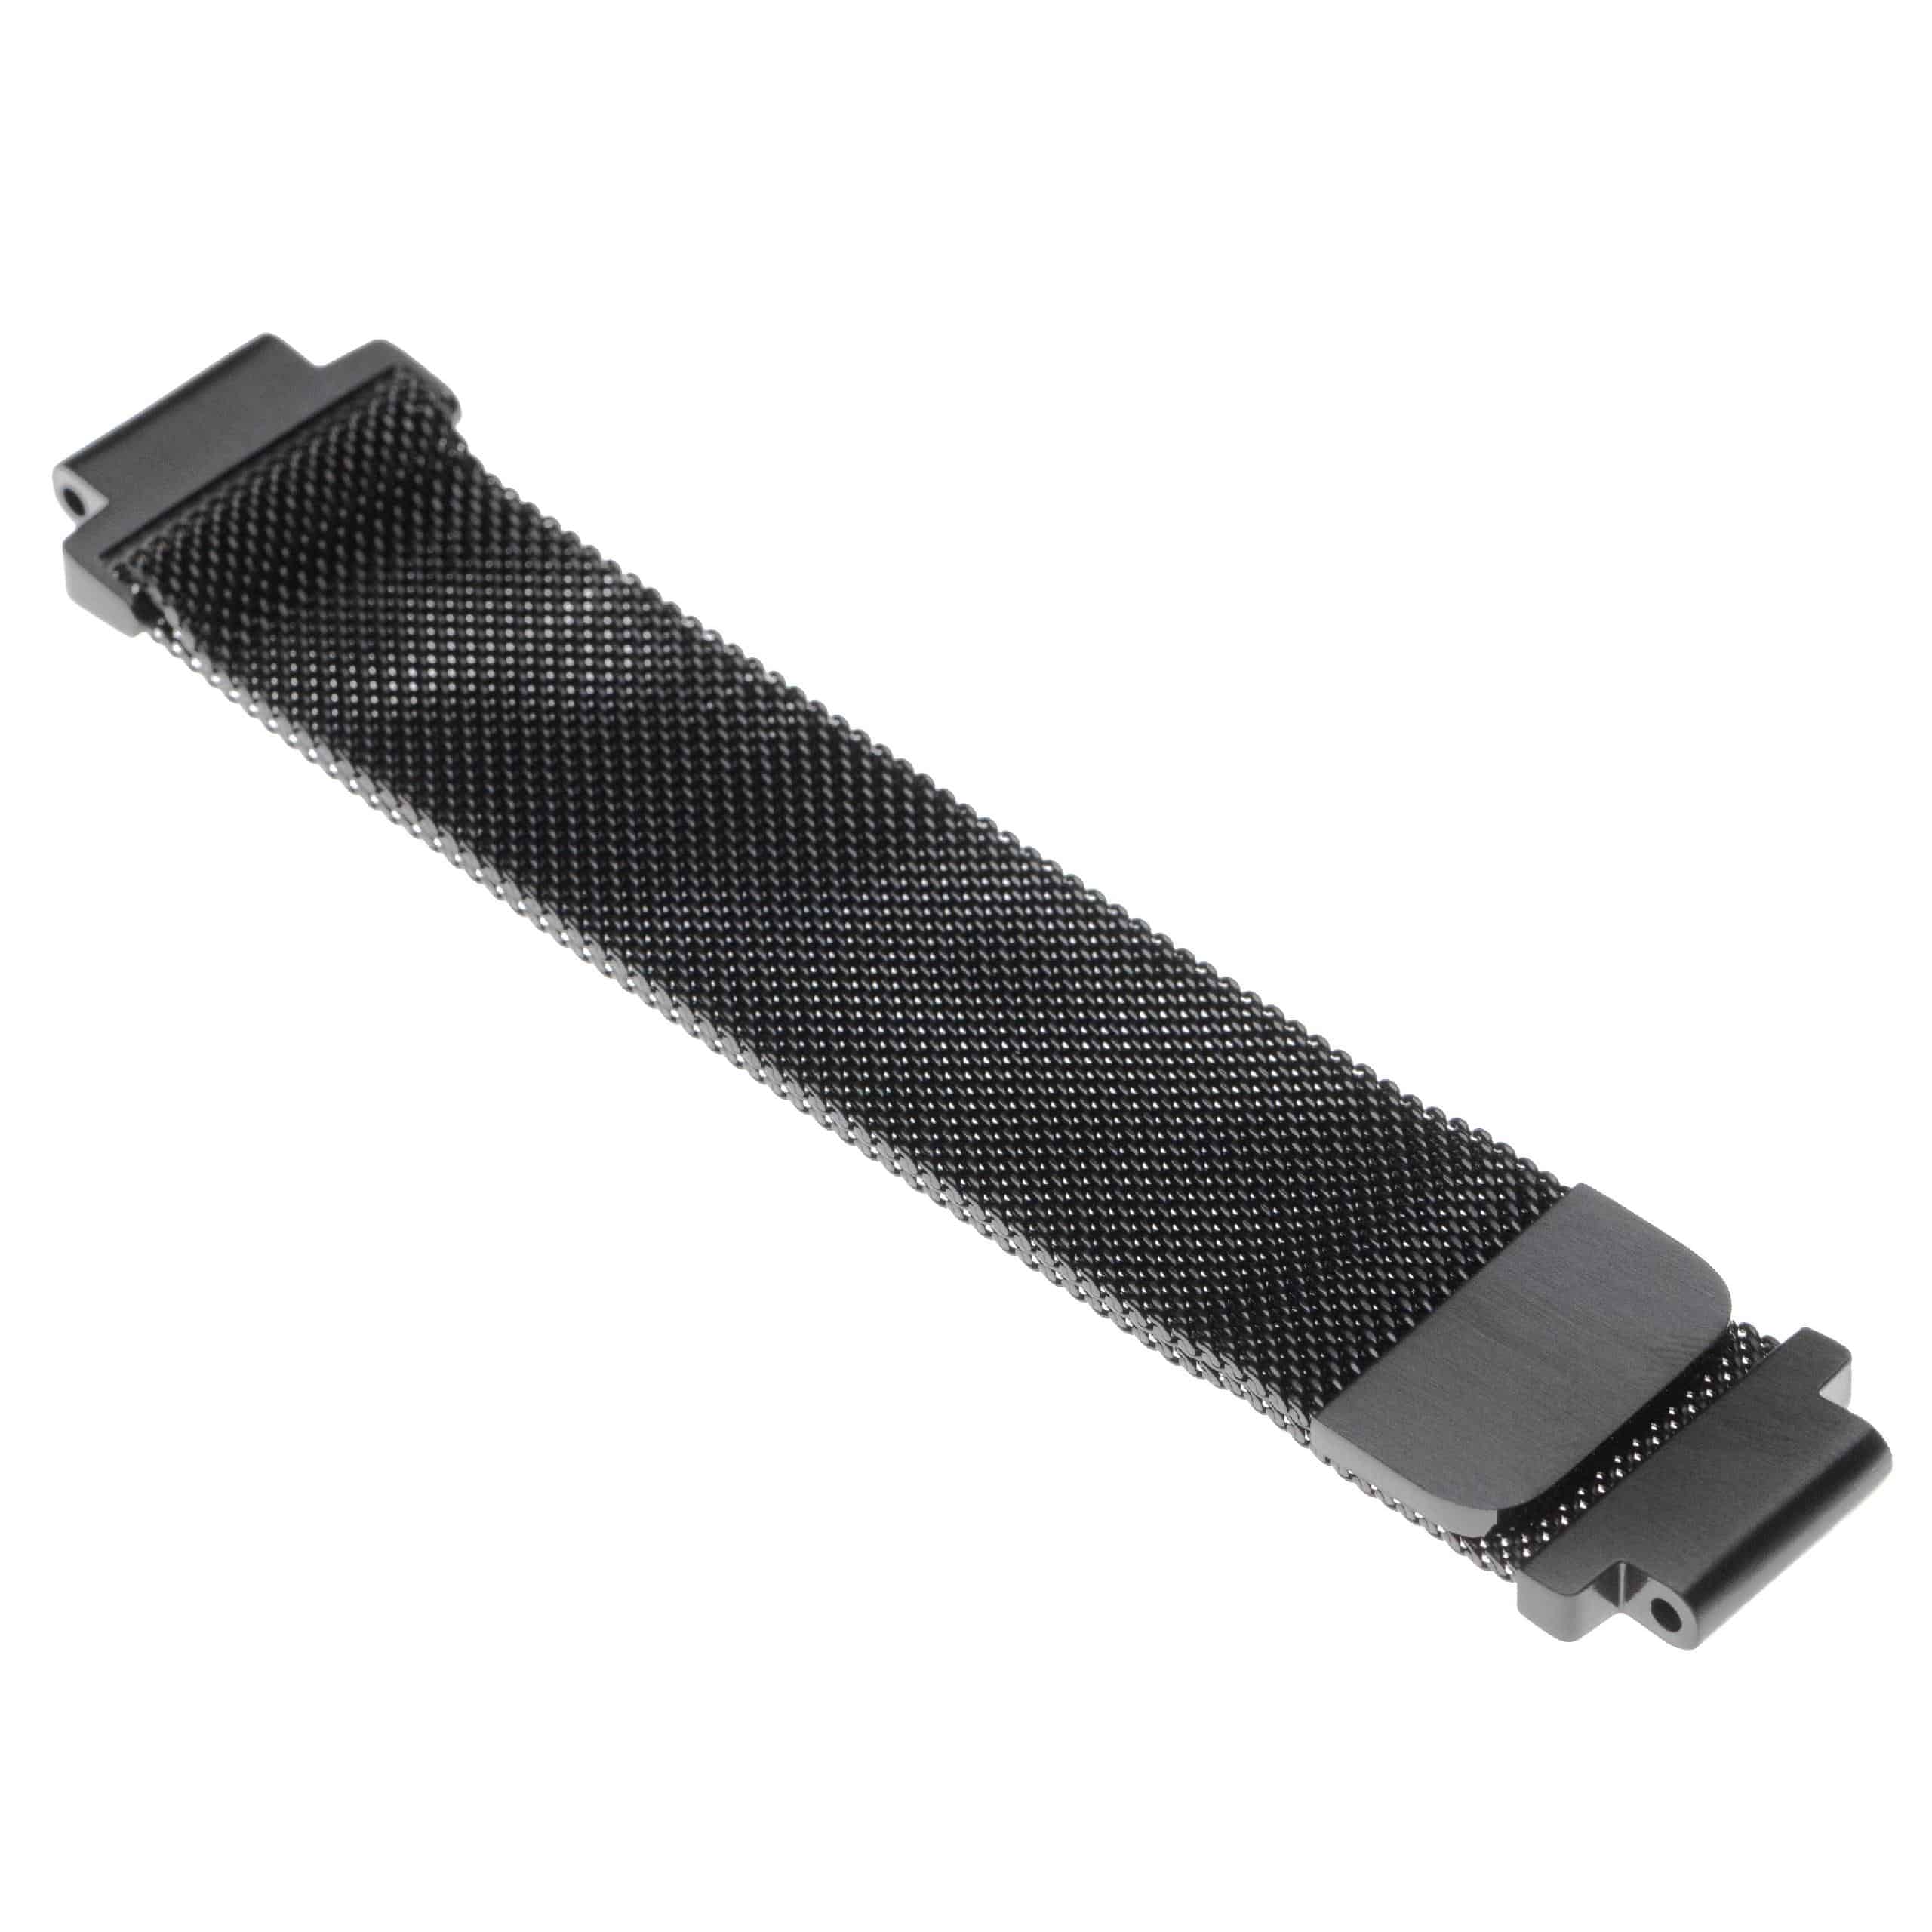 wristband for Garmin Forerunner / Approach Smartwatch - Up to 224 mm wrist circumference, stainless steel, bla